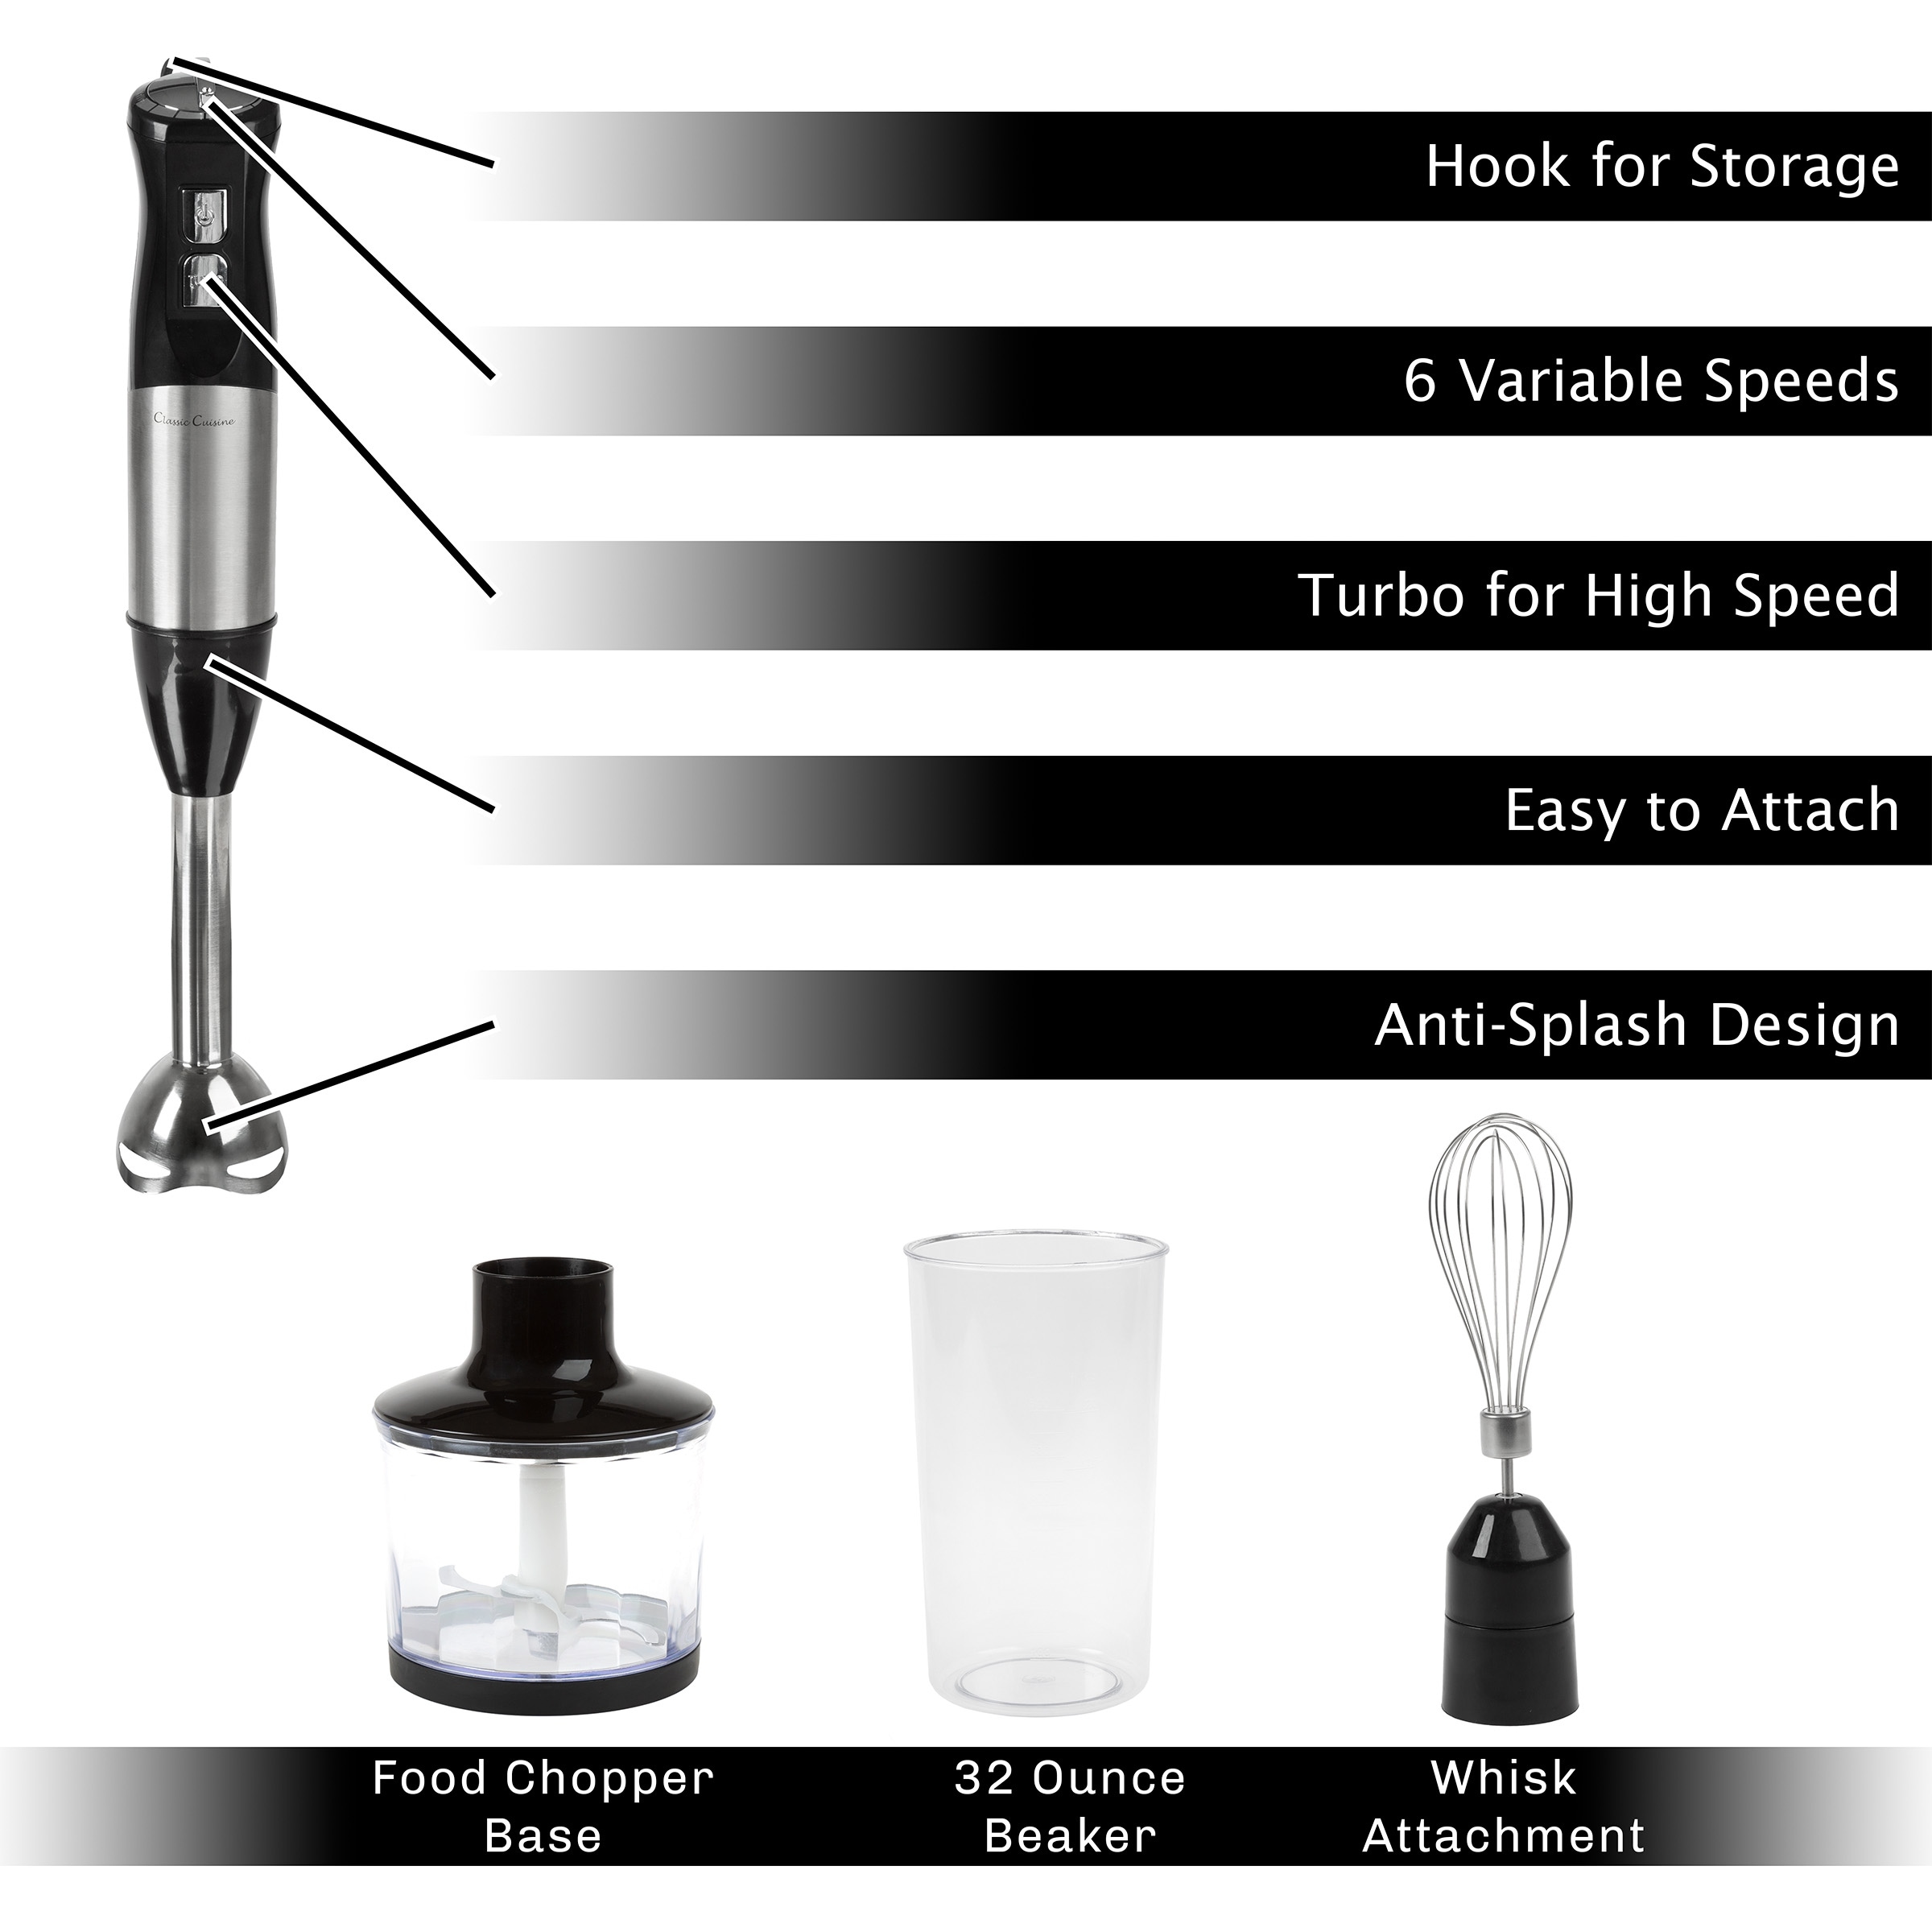 https://ak1.ostkcdn.com/images/products/is/images/direct/bf02c685b8a9056389ad53d9acfd2c9c6da9ccf9/Immersion-Blender-4-in-1-6-Speed-Hand-Mixer-Set-by-Classic-Cuisine.jpg